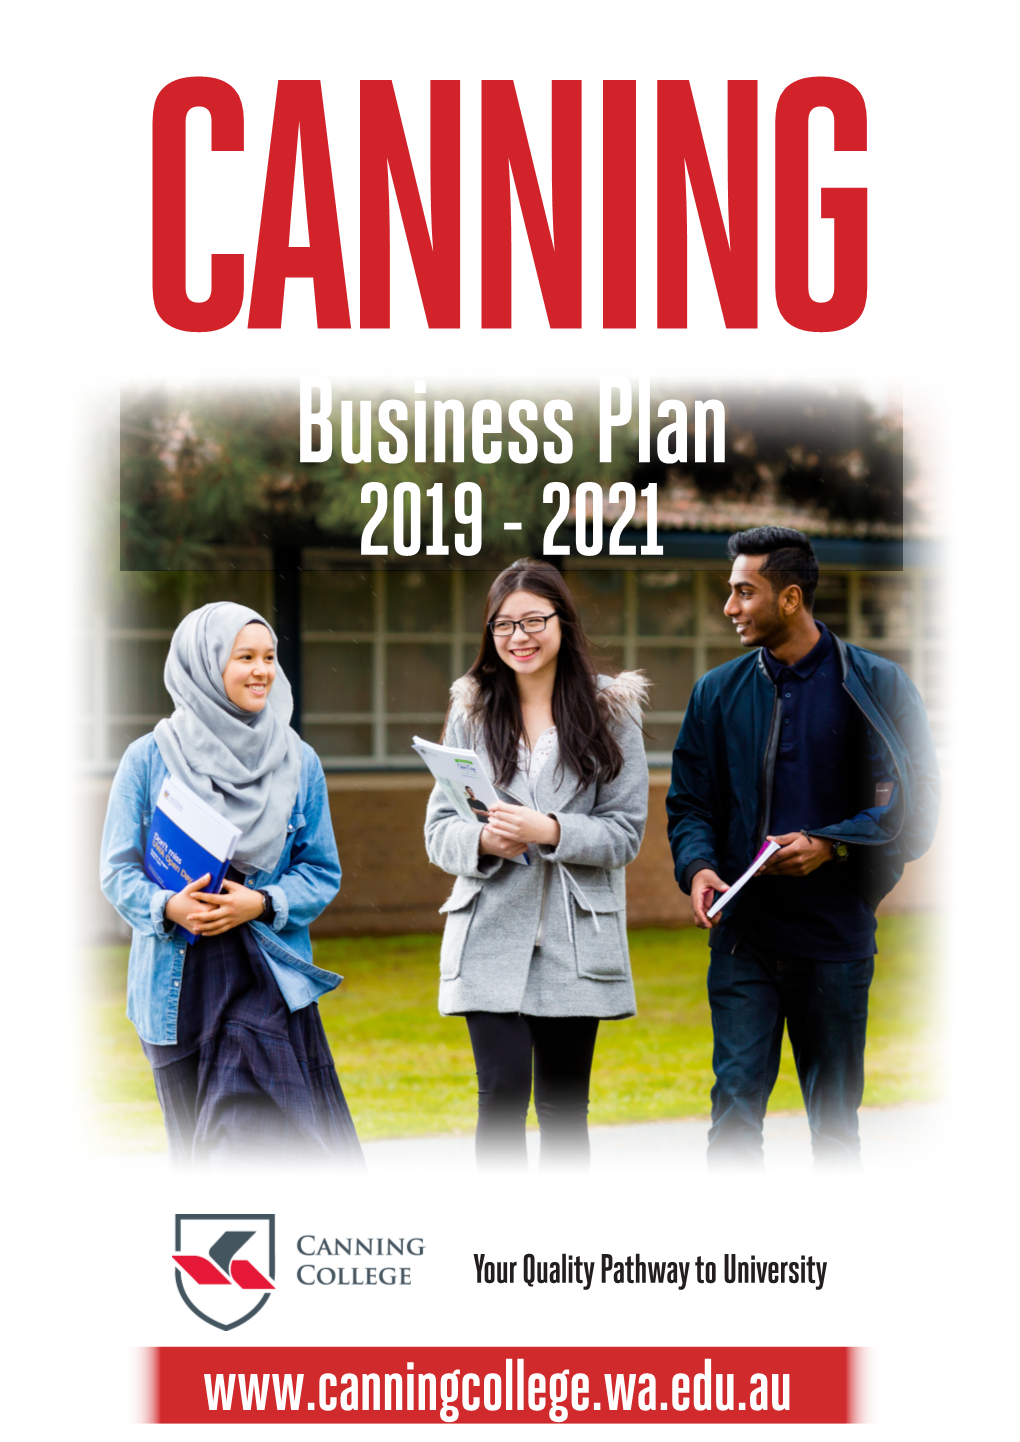 Canning College Vision, Purpose and Values